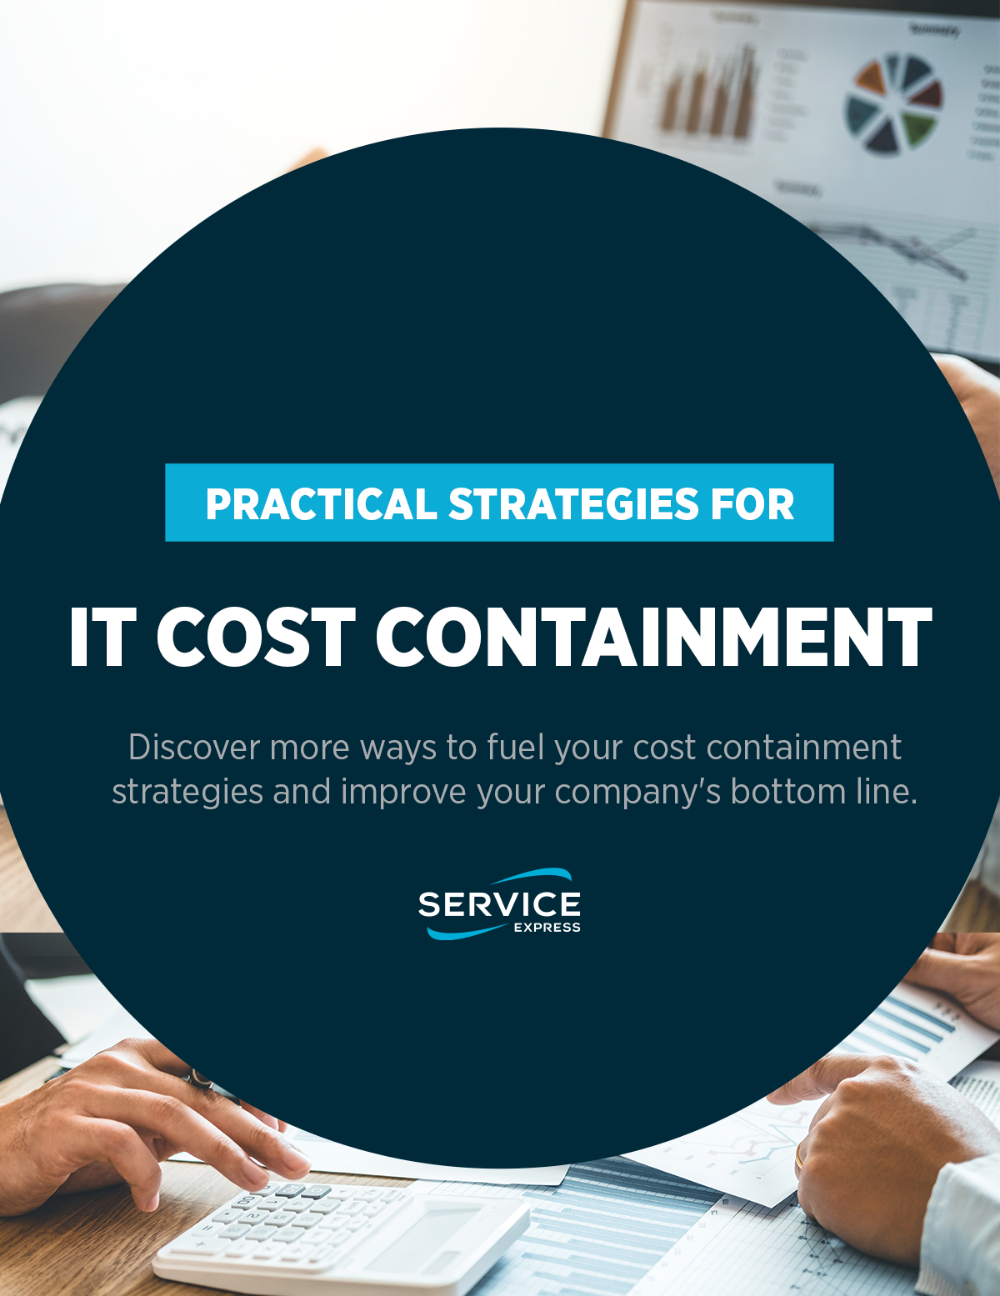 Screenshot 2020 10 20 it cost containment syndication cover png PNG Image 1200 × 1555 pixels Scaled 41 - Practical Strategies for IT Cost Containment